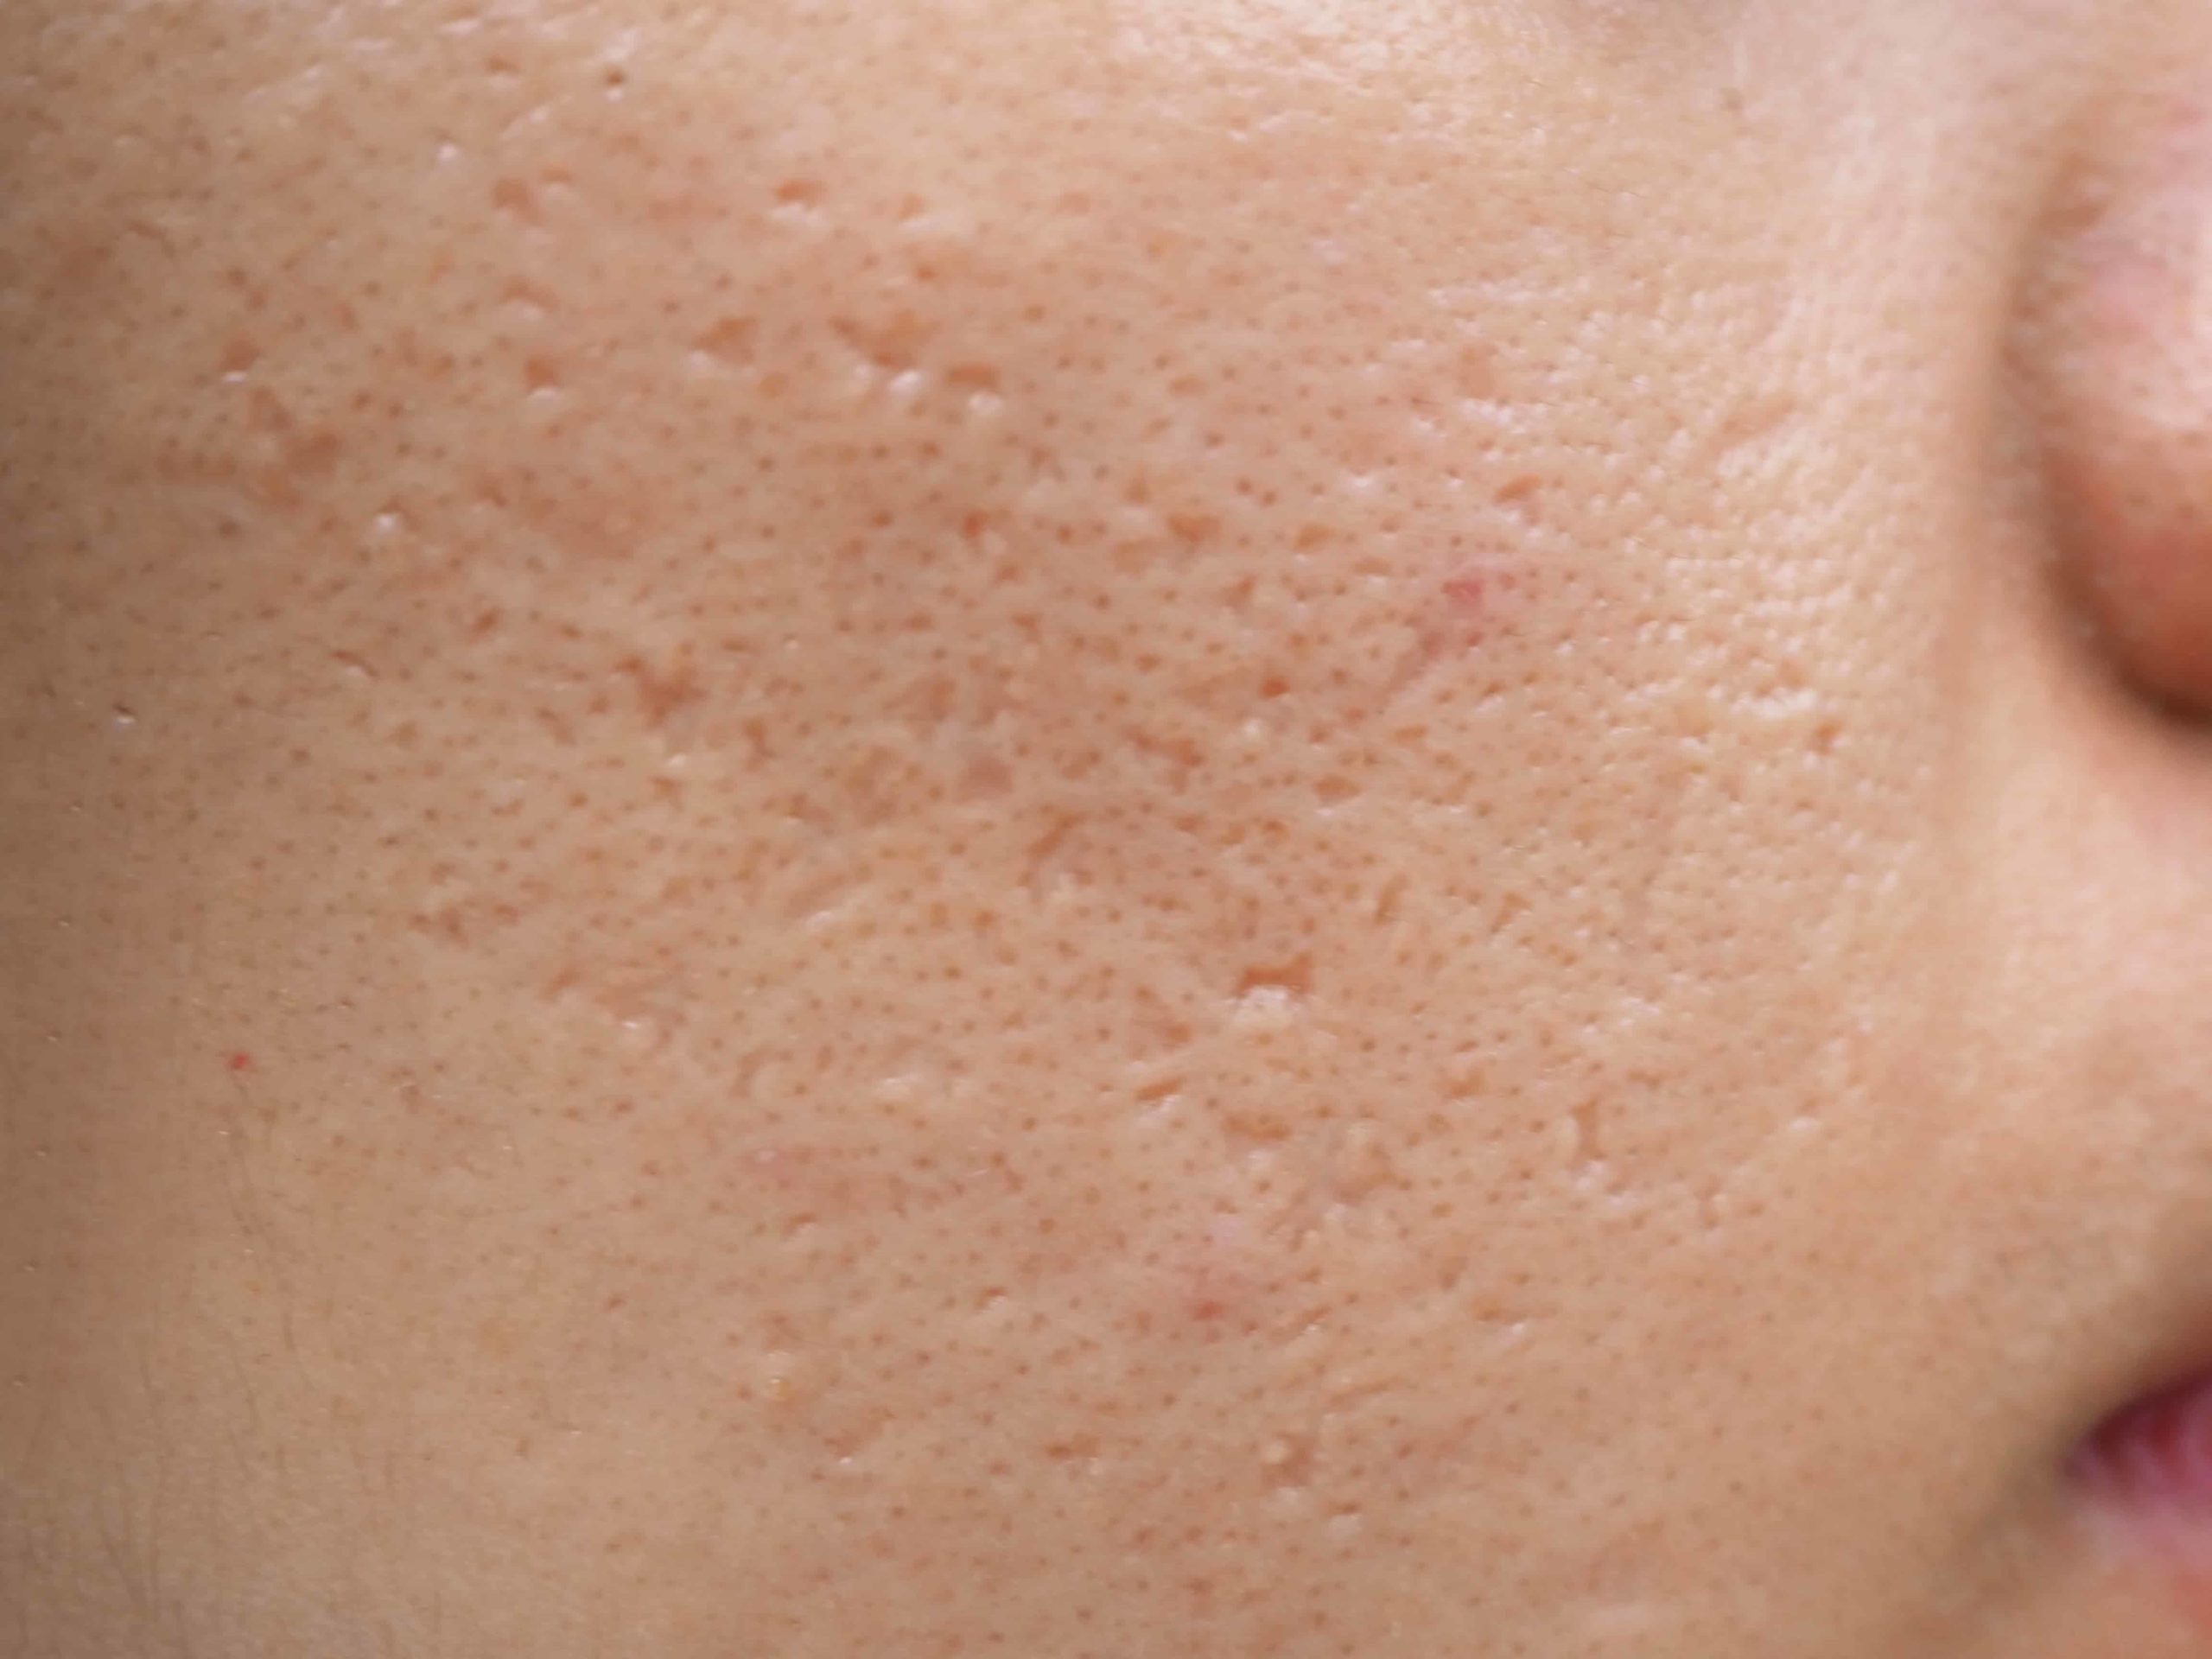 Acne scars shown on a woman's face